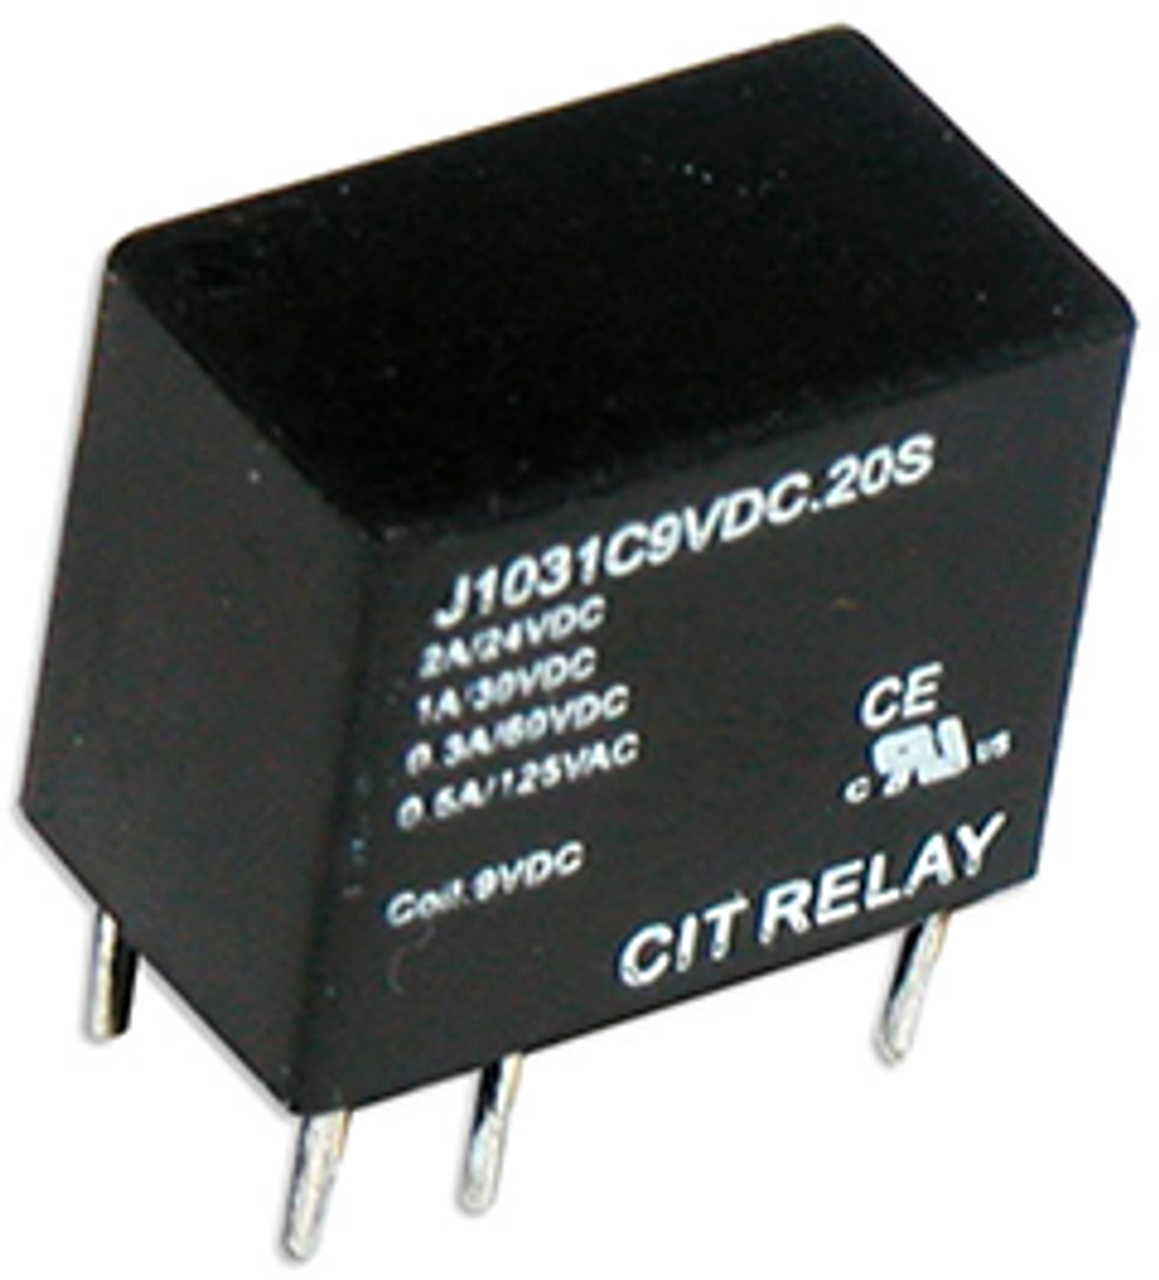 CIT Relay and Switch J1031A5VDC.15S Signal Relays